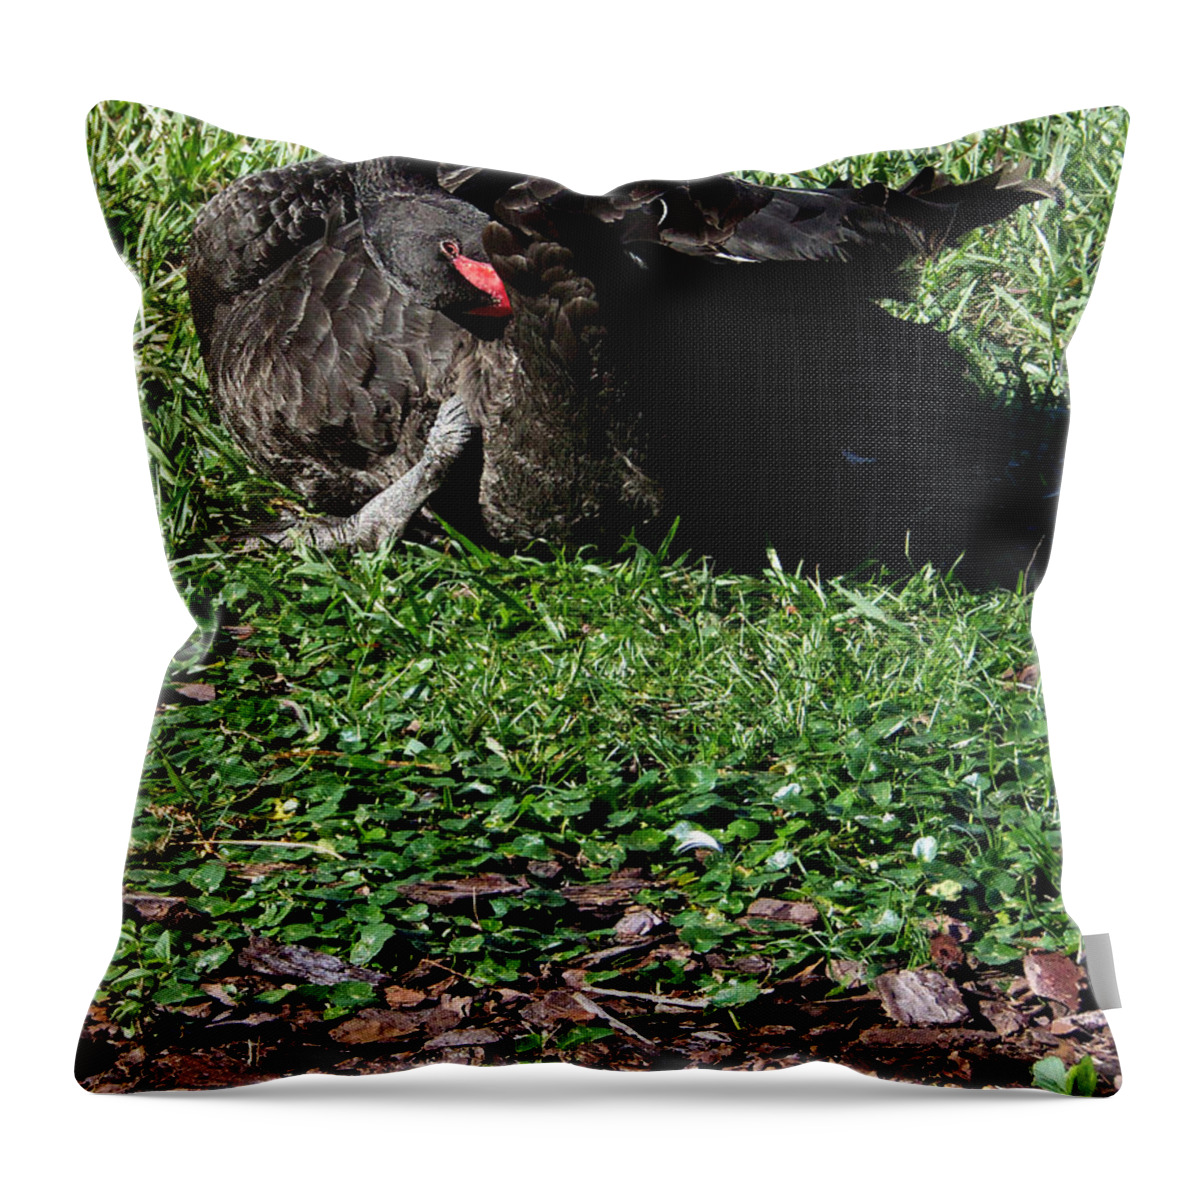 Black Swan Throw Pillow featuring the photograph Black Swan by Christopher Mercer